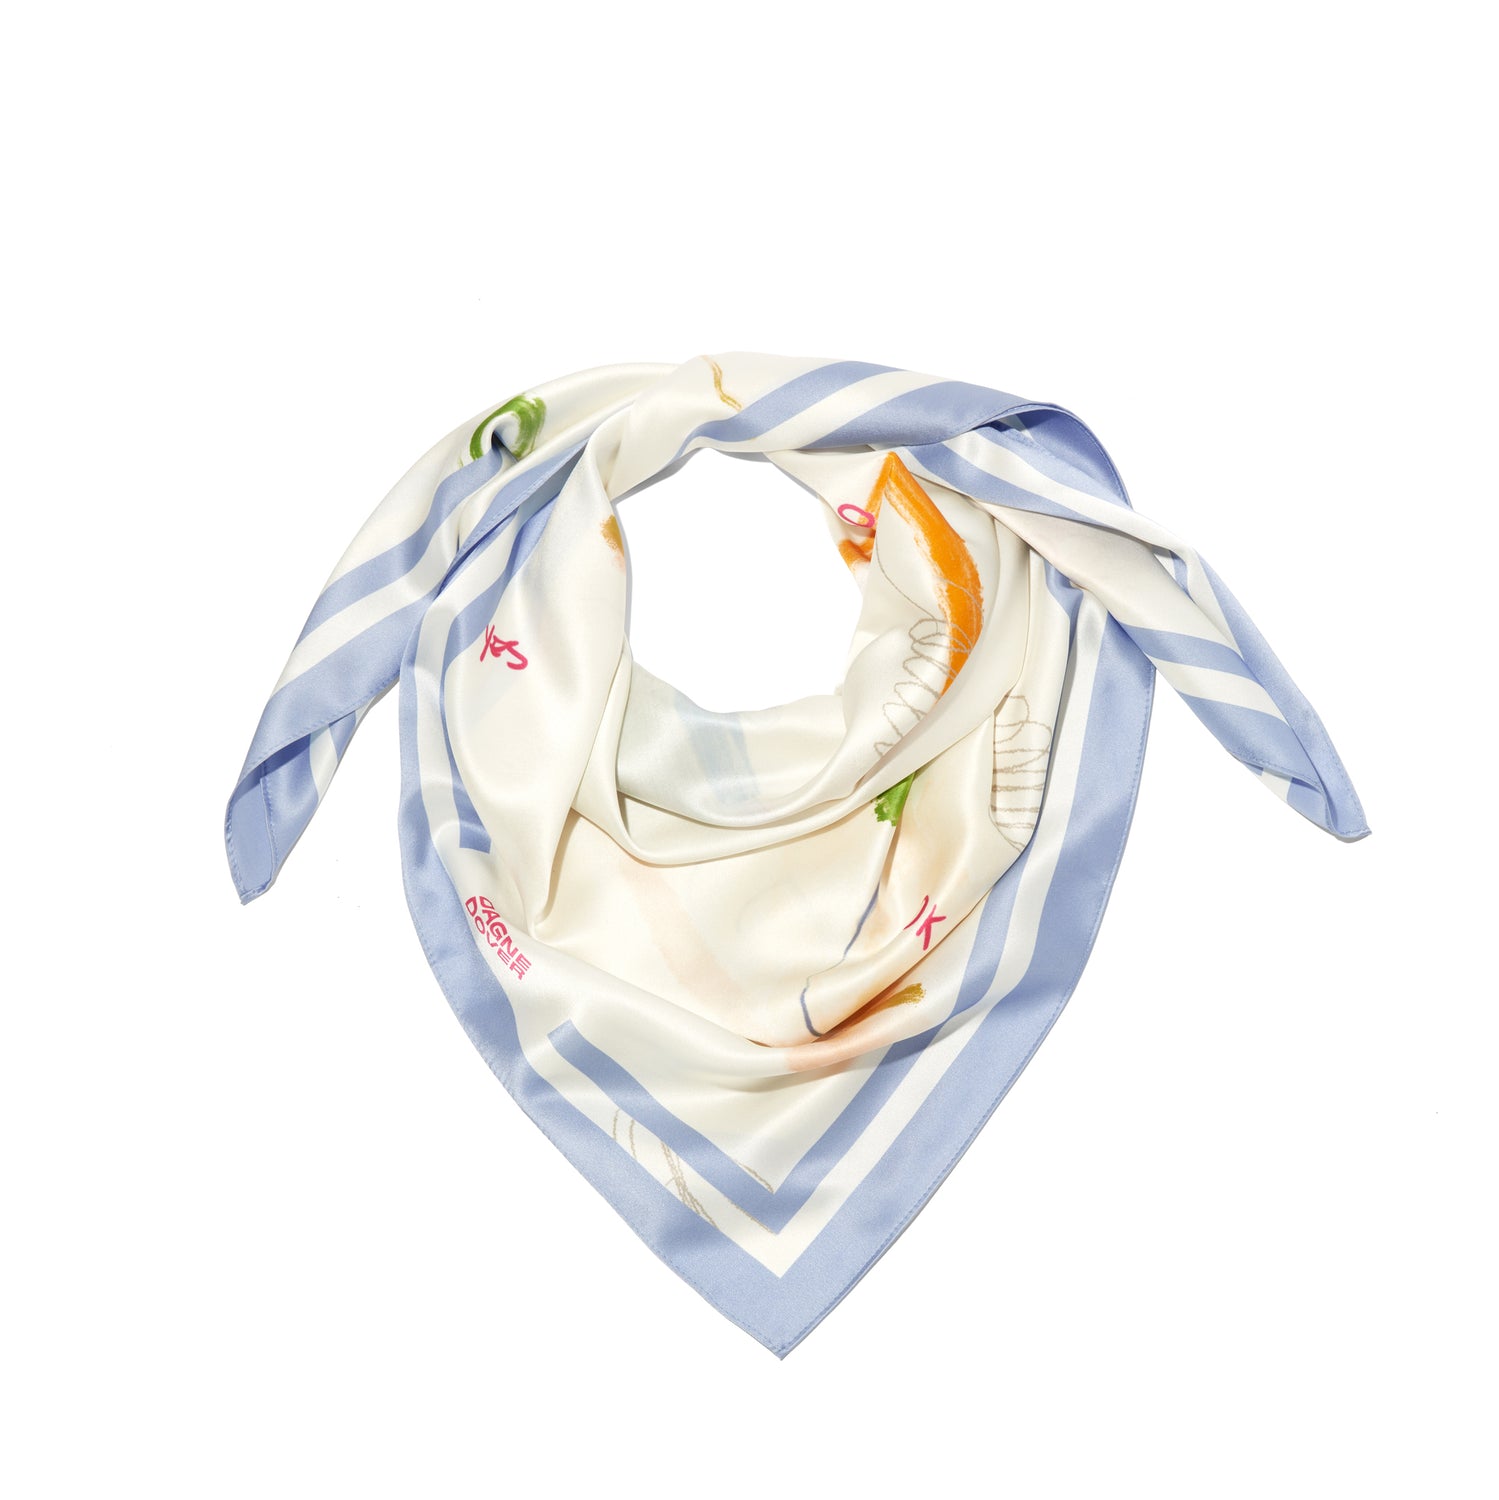 Hermes bags ~ Perfect Match ~ Hermes Scarves/Shawls